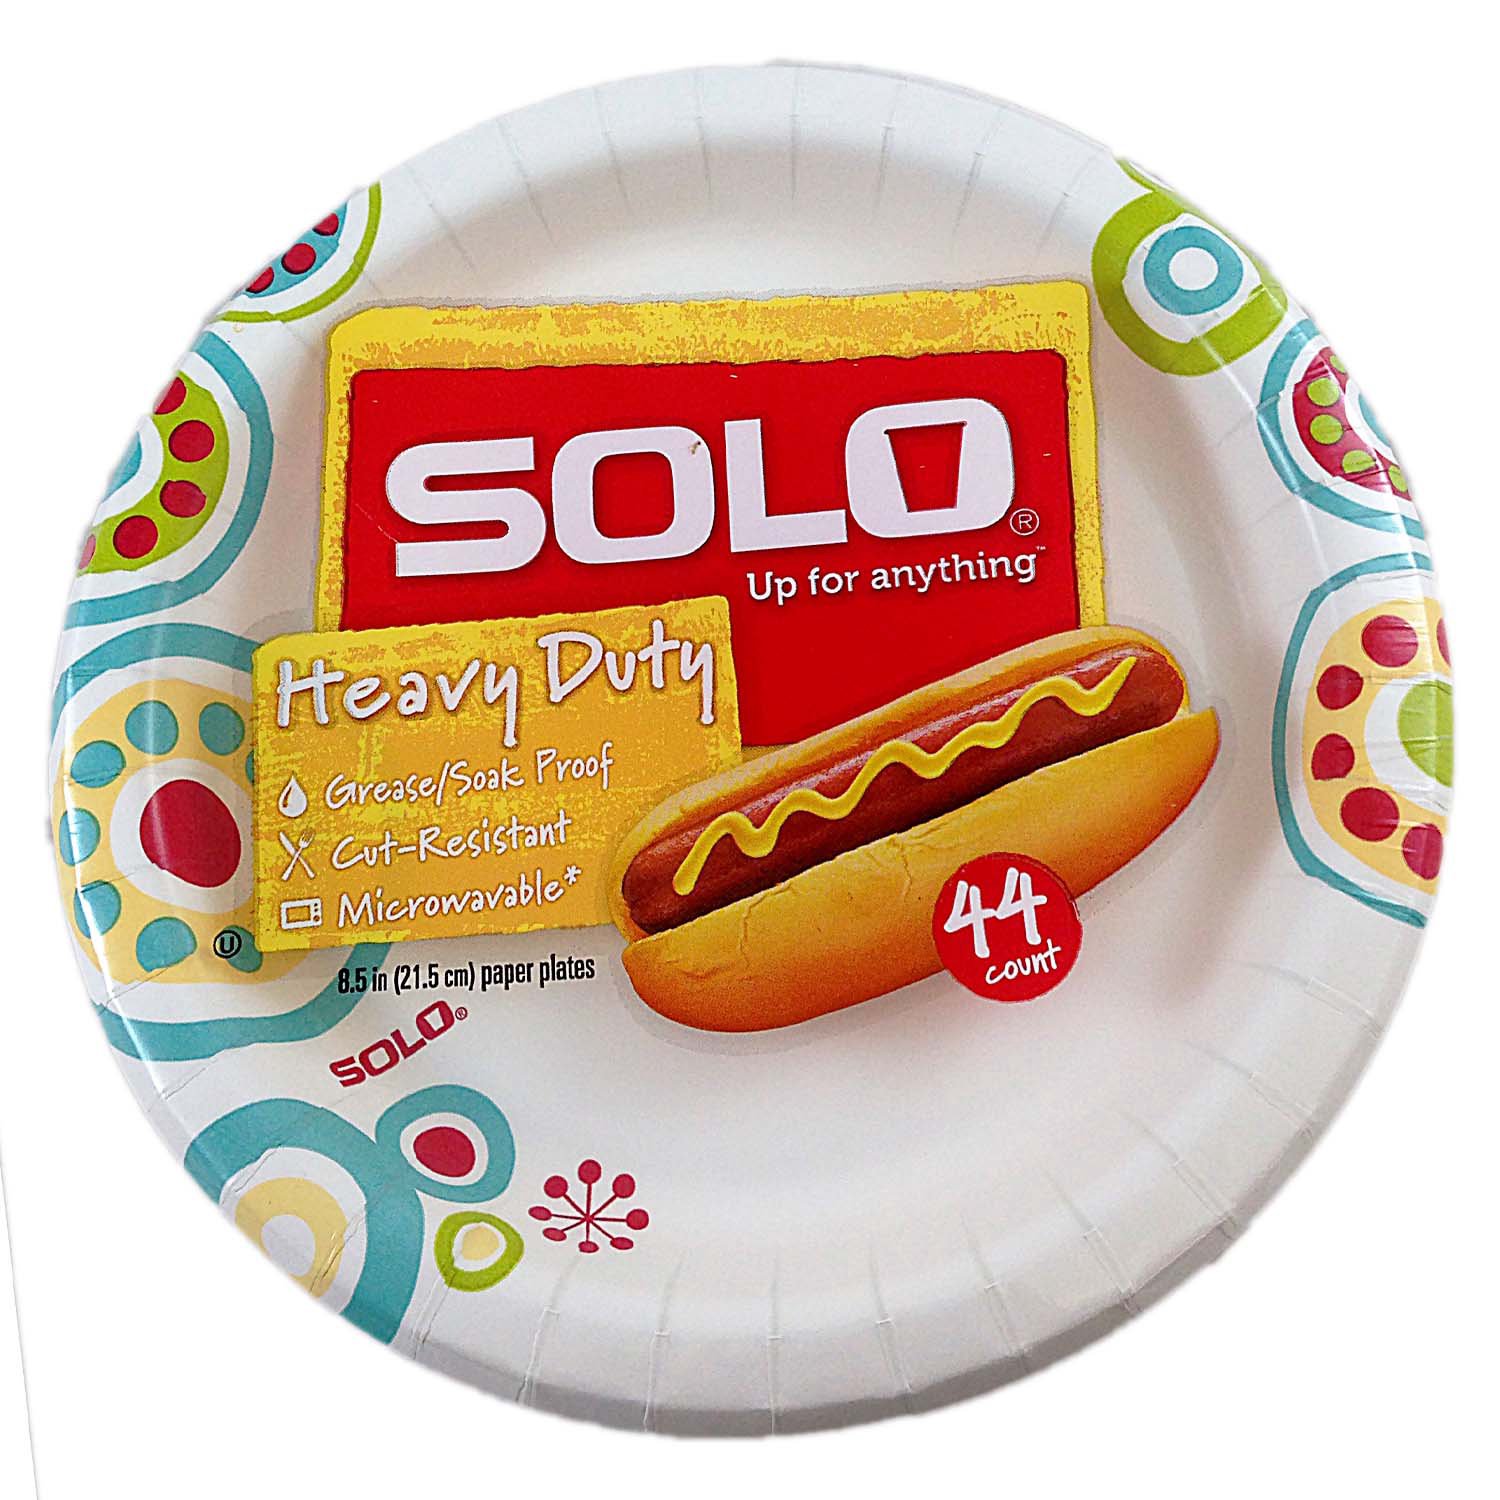 Red Heavy Duty Paper Plates